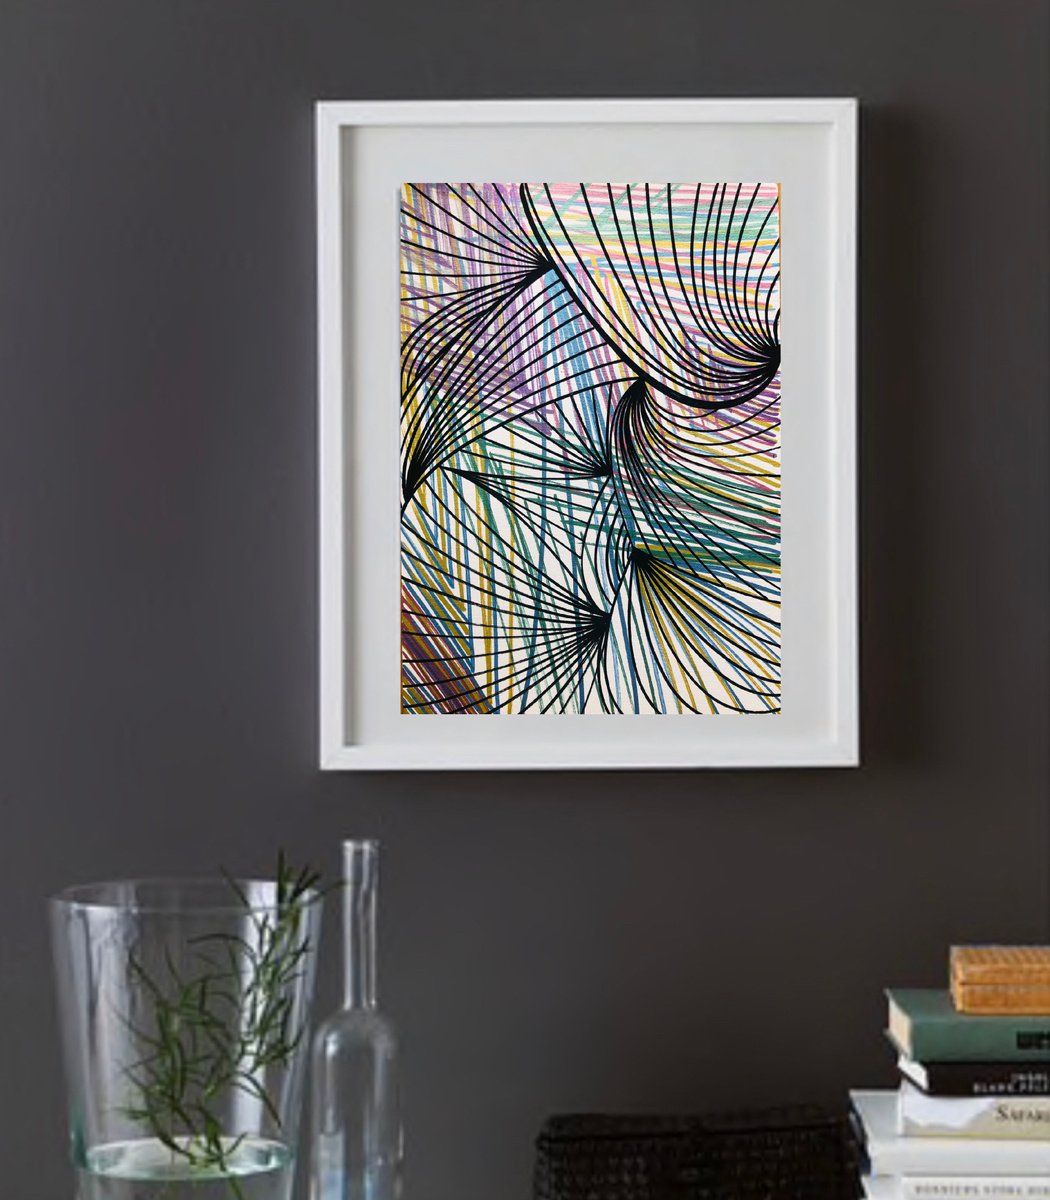 Debut 48 - Abstract Optical Art - Black and Metallic by Elena Renaudiere